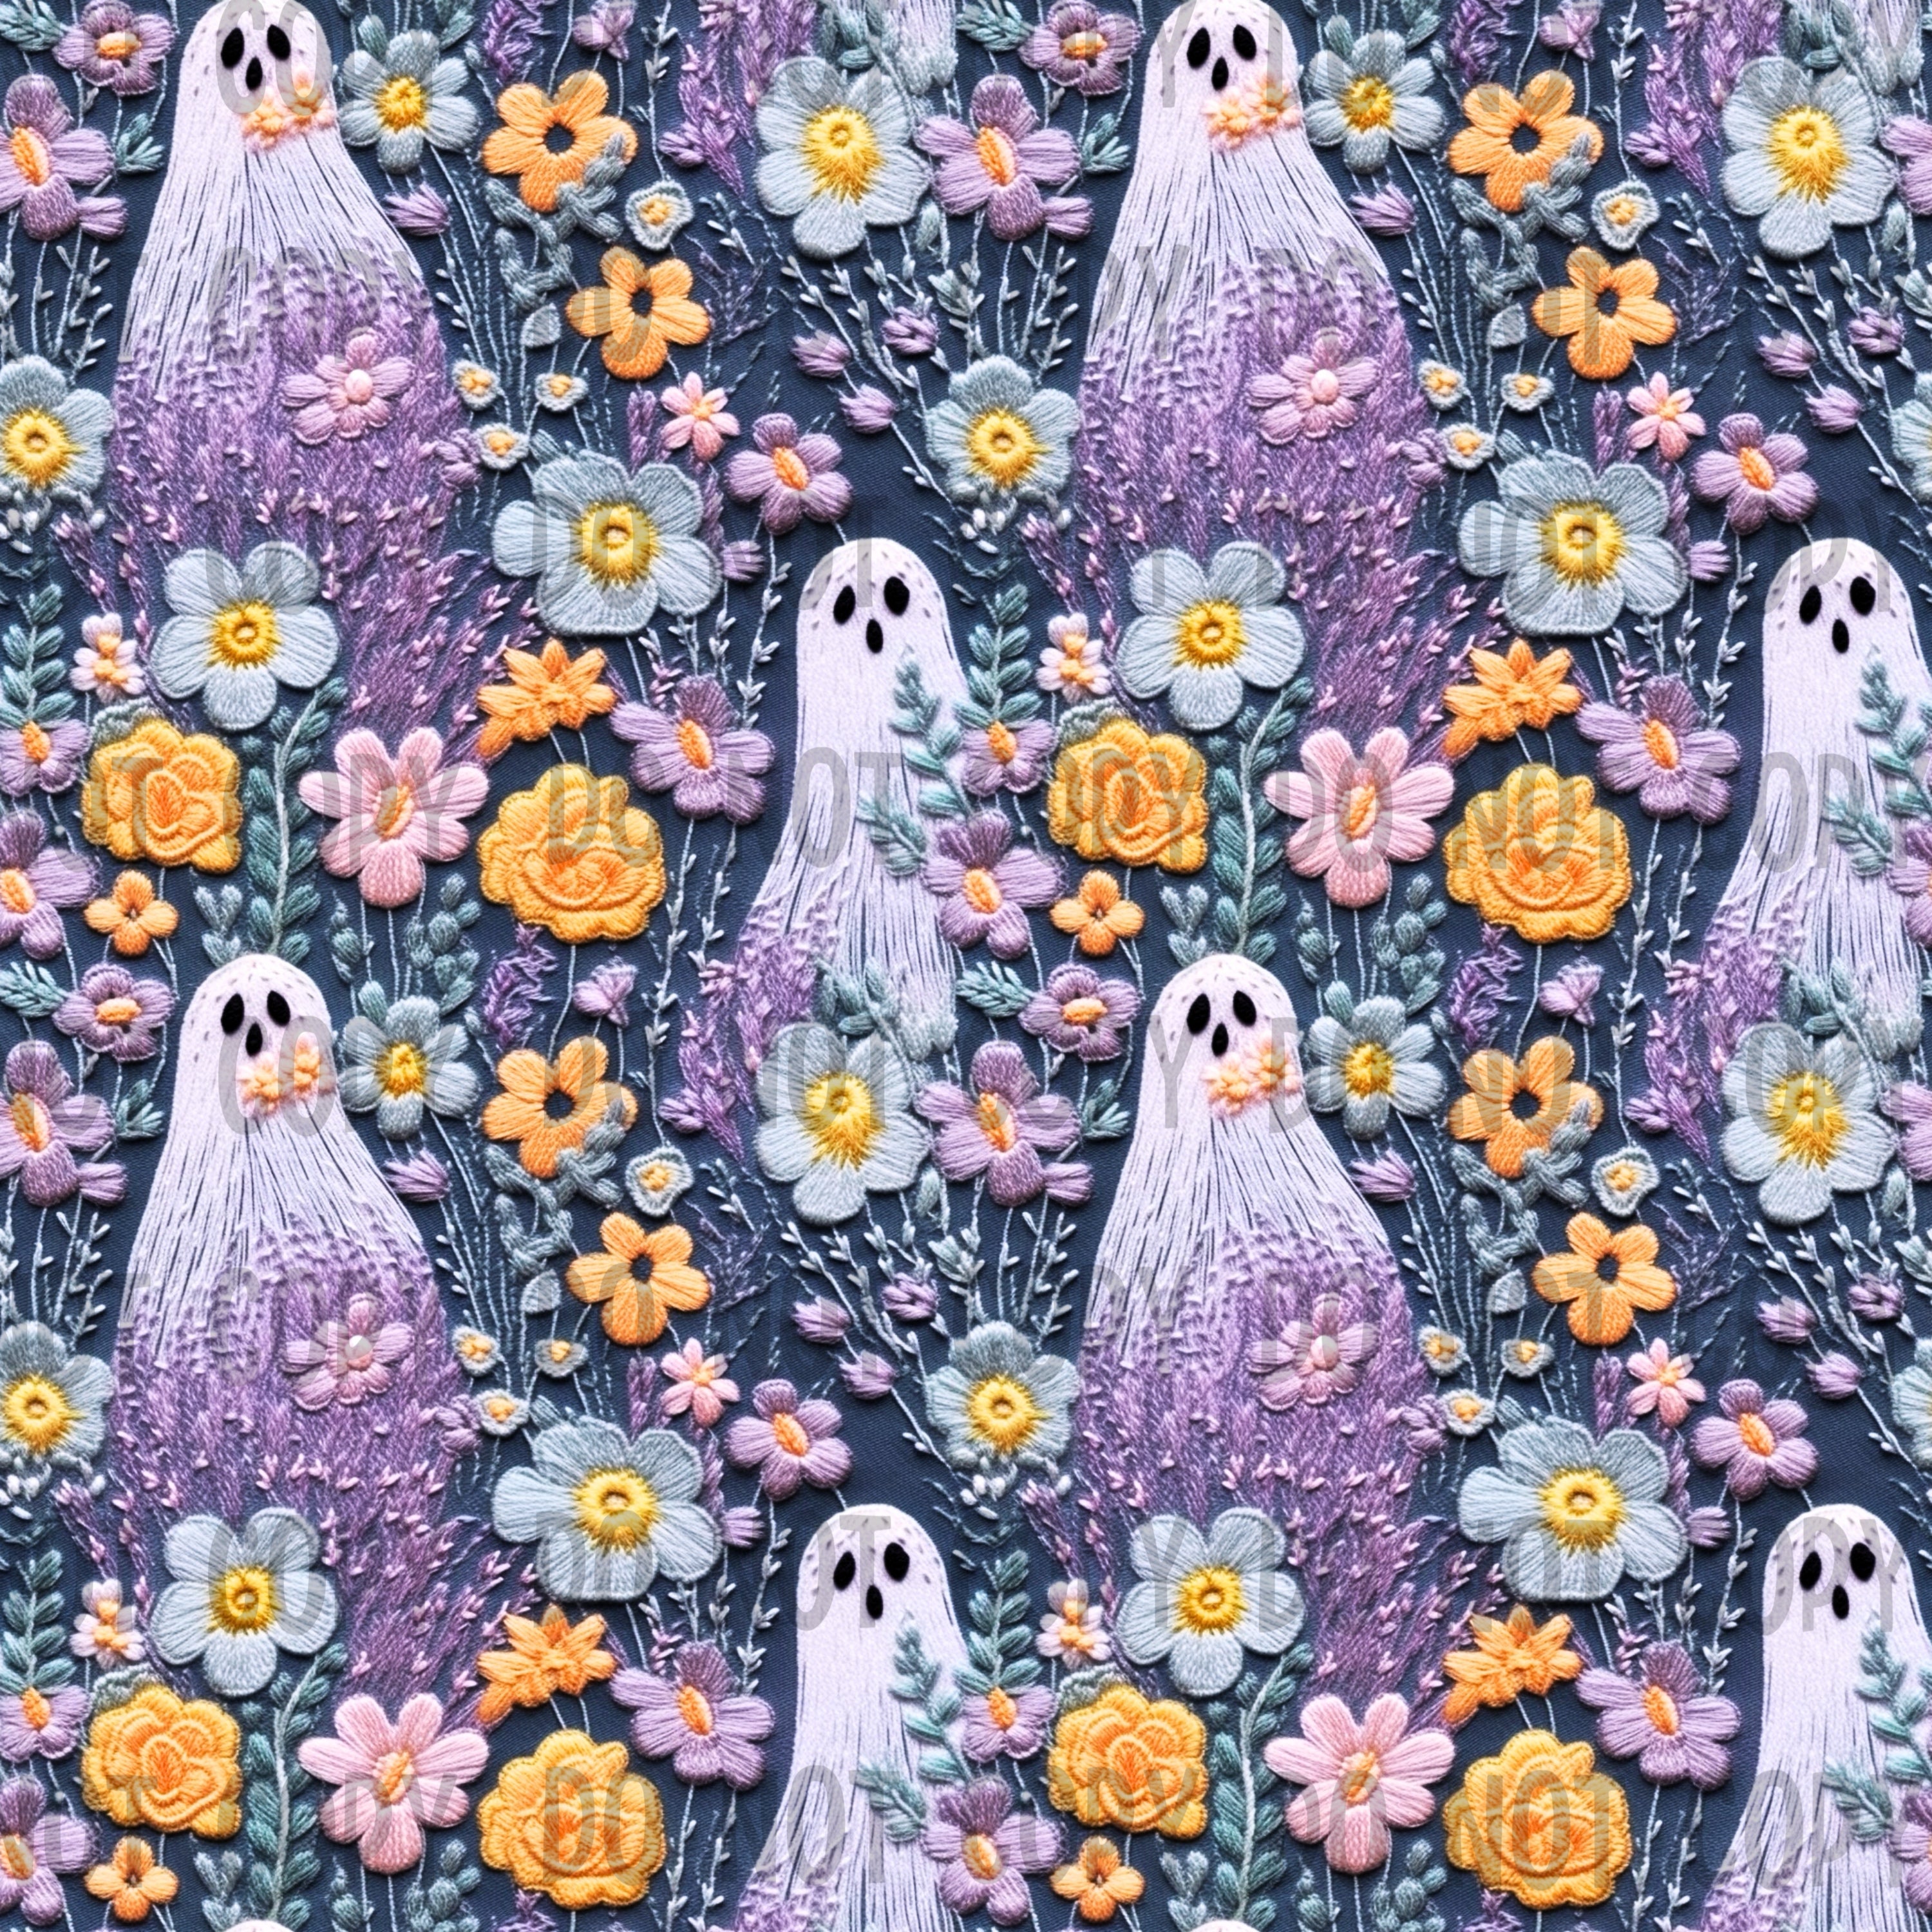 Ghostie embroidery